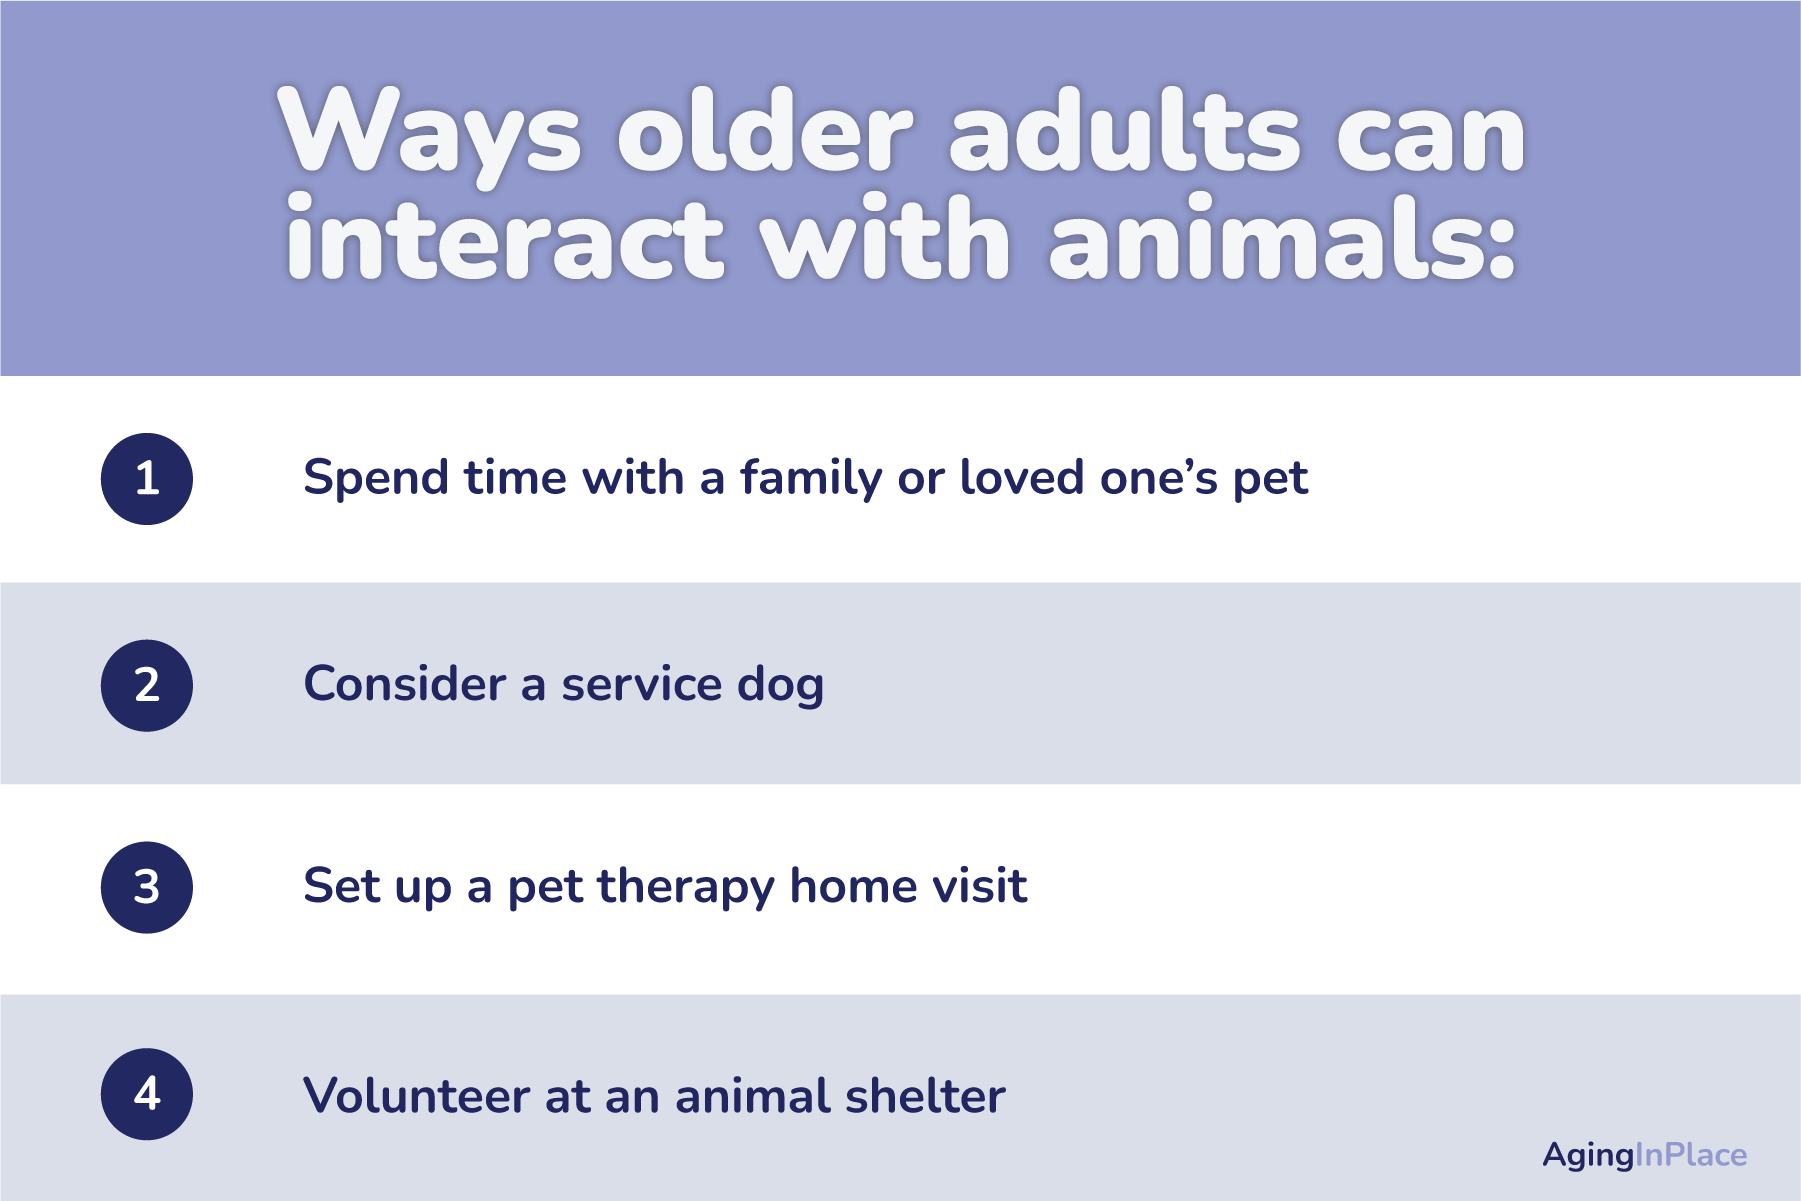 Ways that older adults can interact with pets and animals